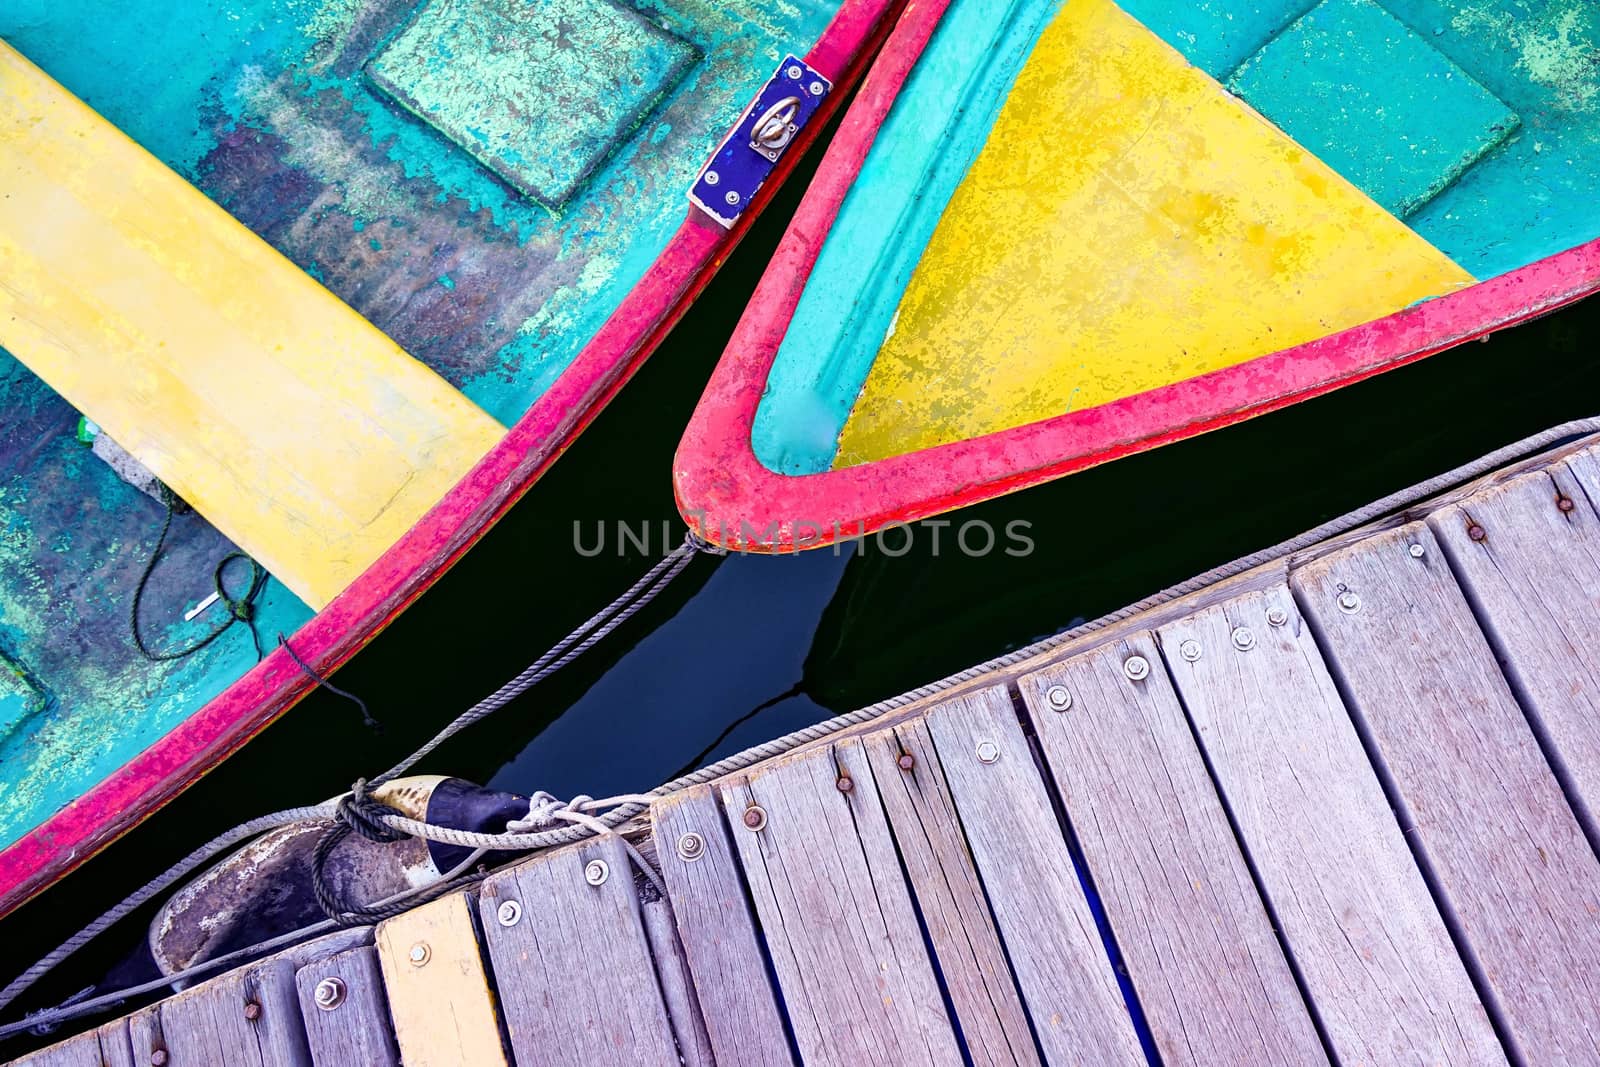 The colorful recreational boats and wooden pier from top view angle